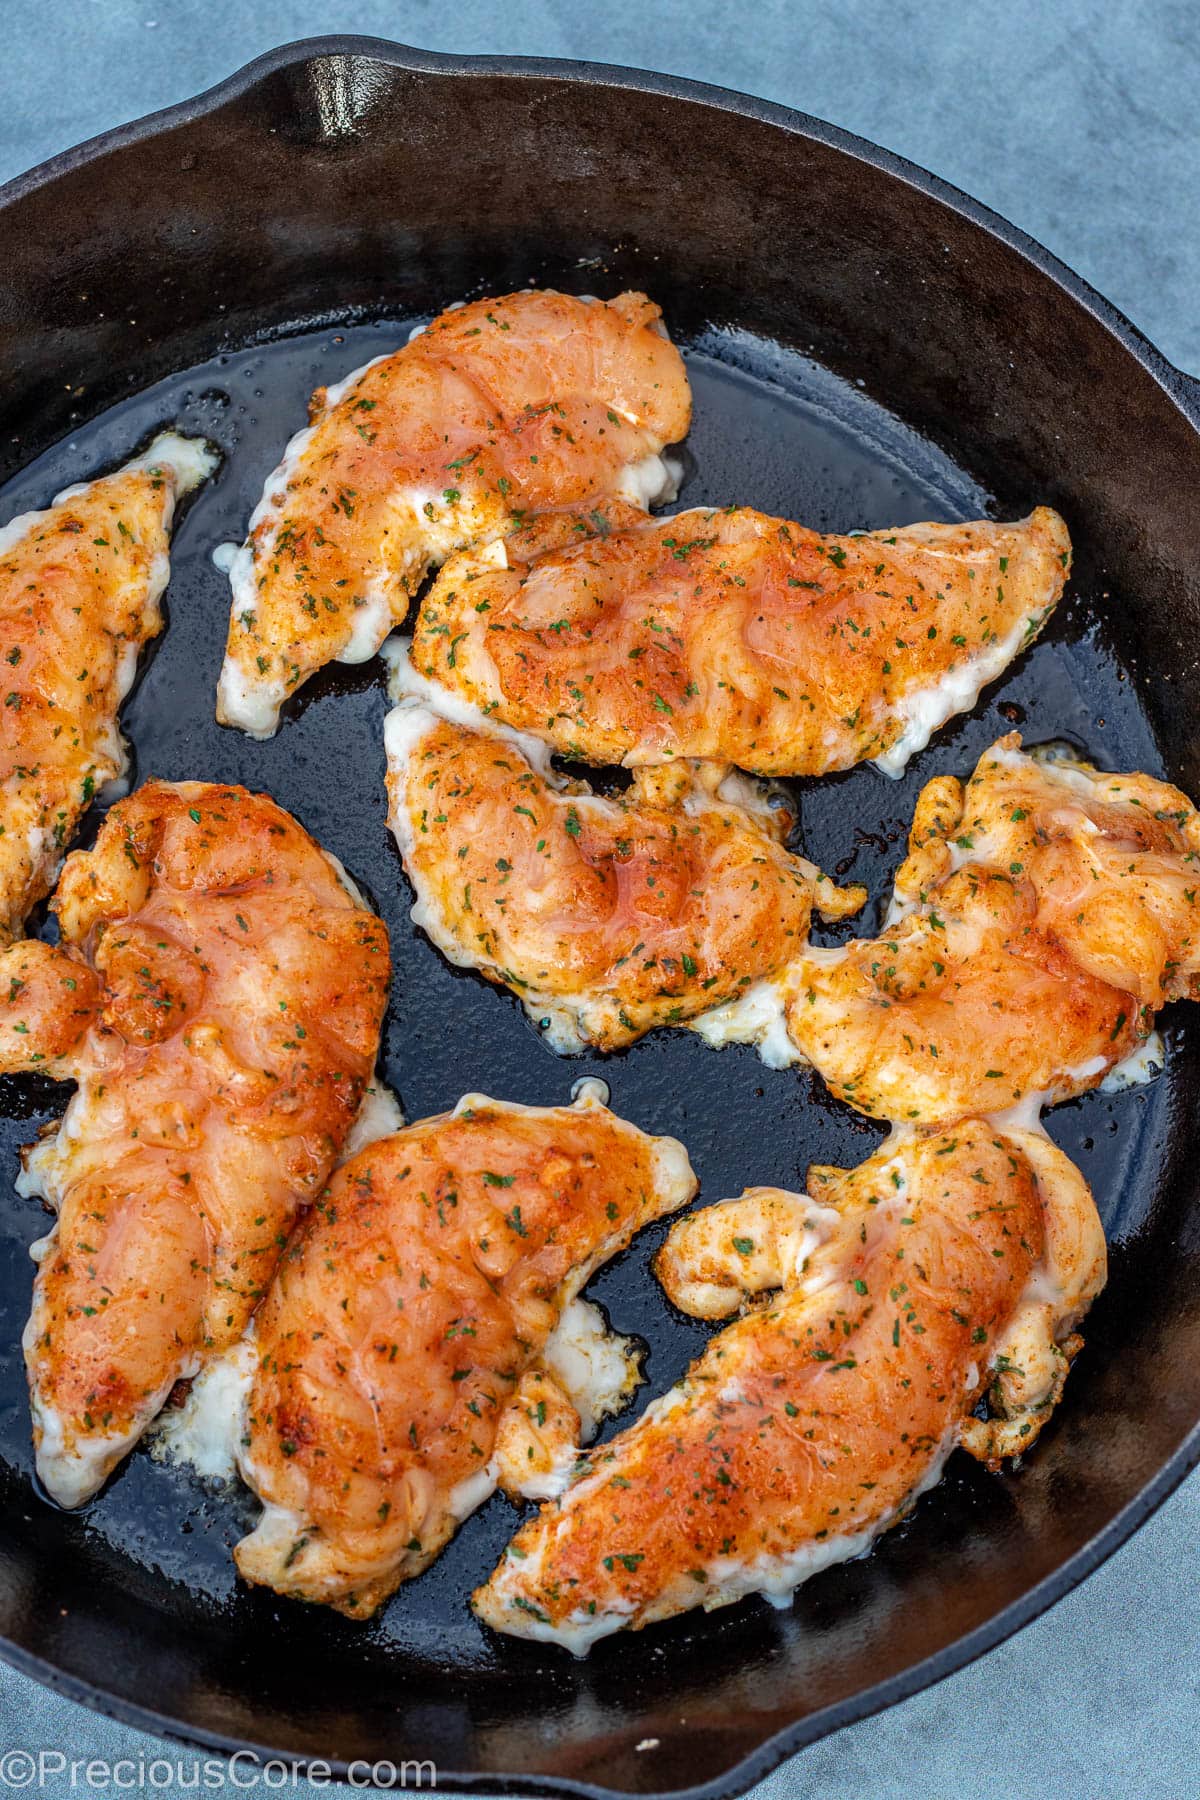 Raw chicken tenders searing in a skillet.